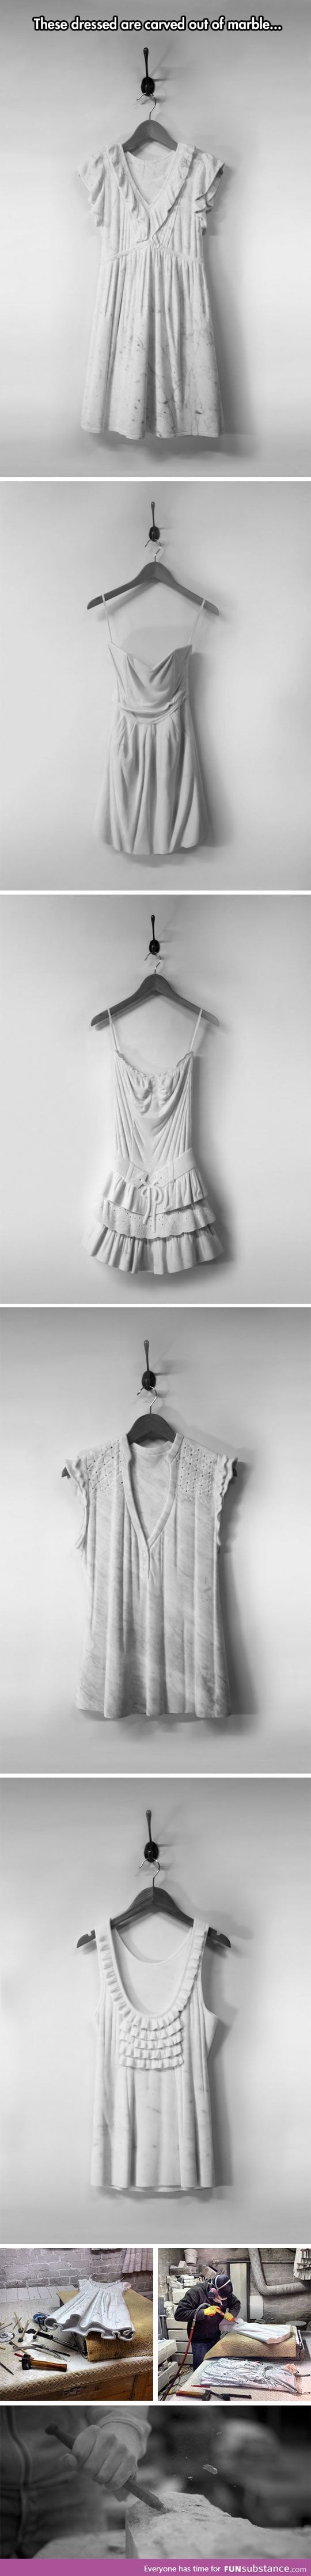 Airy dresses carved from marble